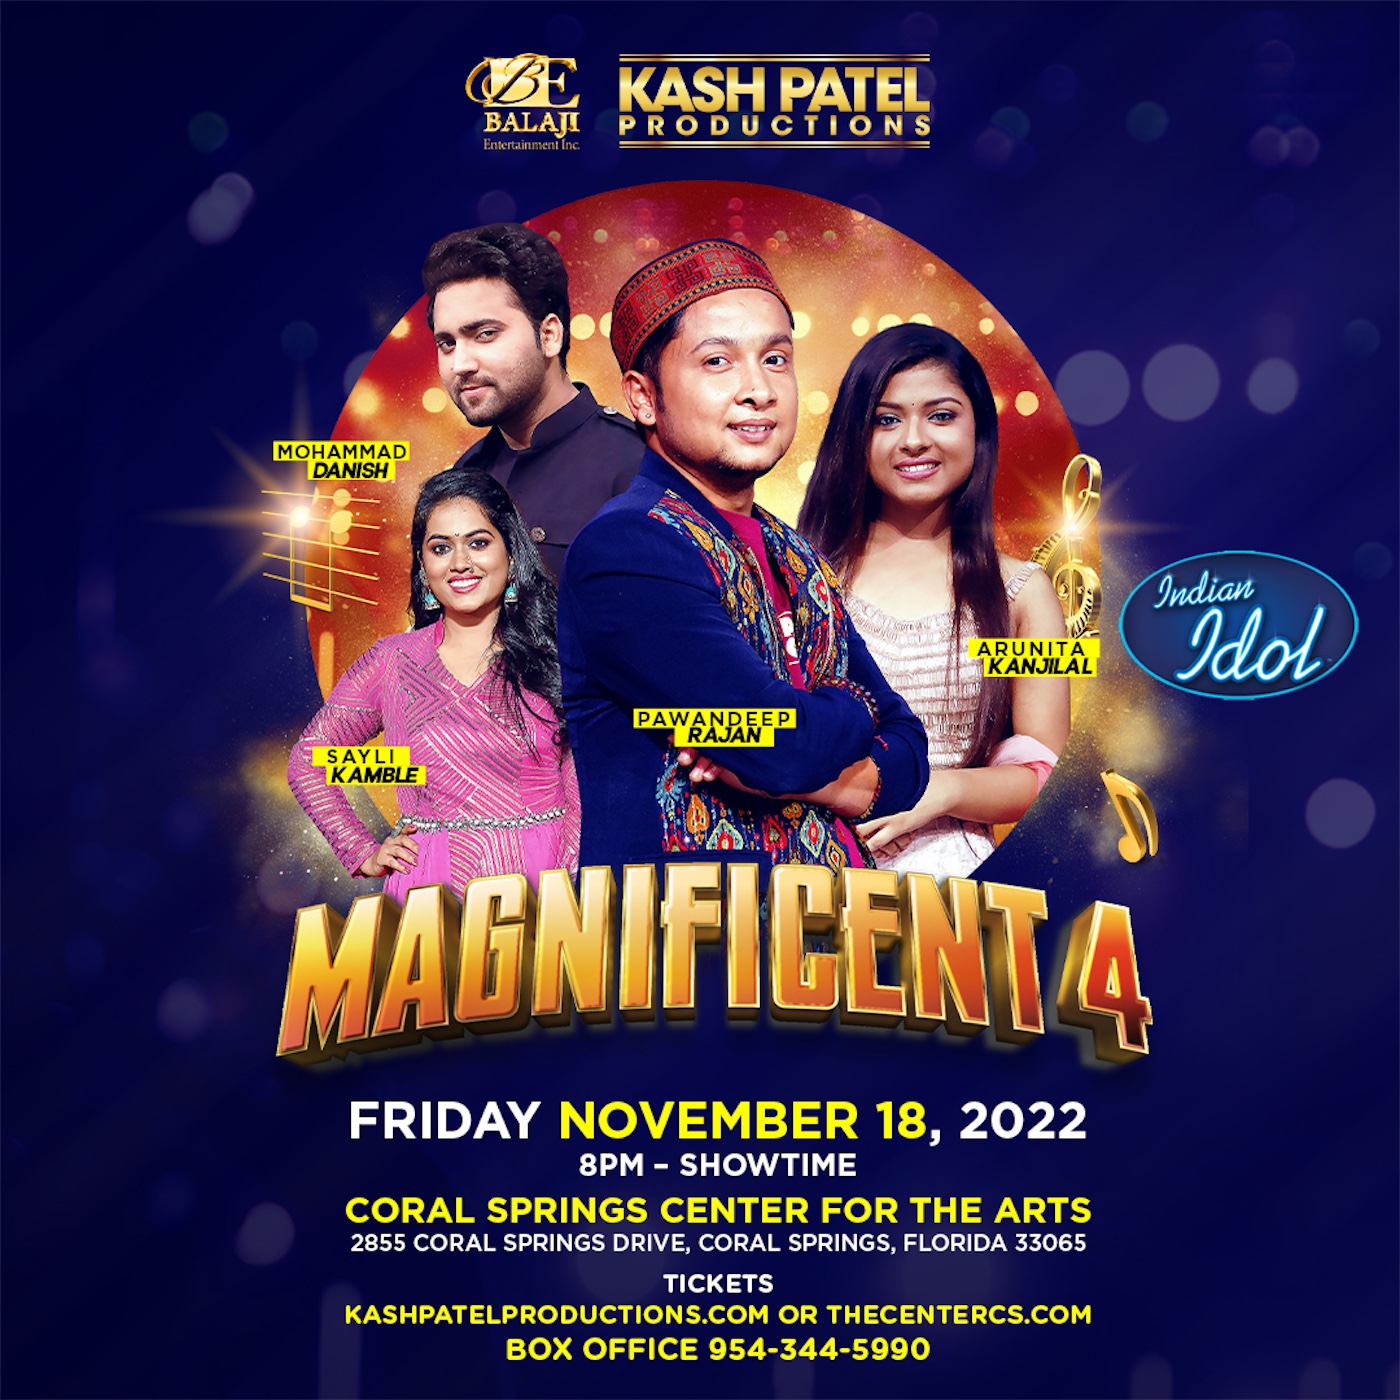 Kash Patel Productions Magnificent 4 Indian Idol Bollywood Live Tour Fort Lauderdale FL November 18th 2022 11